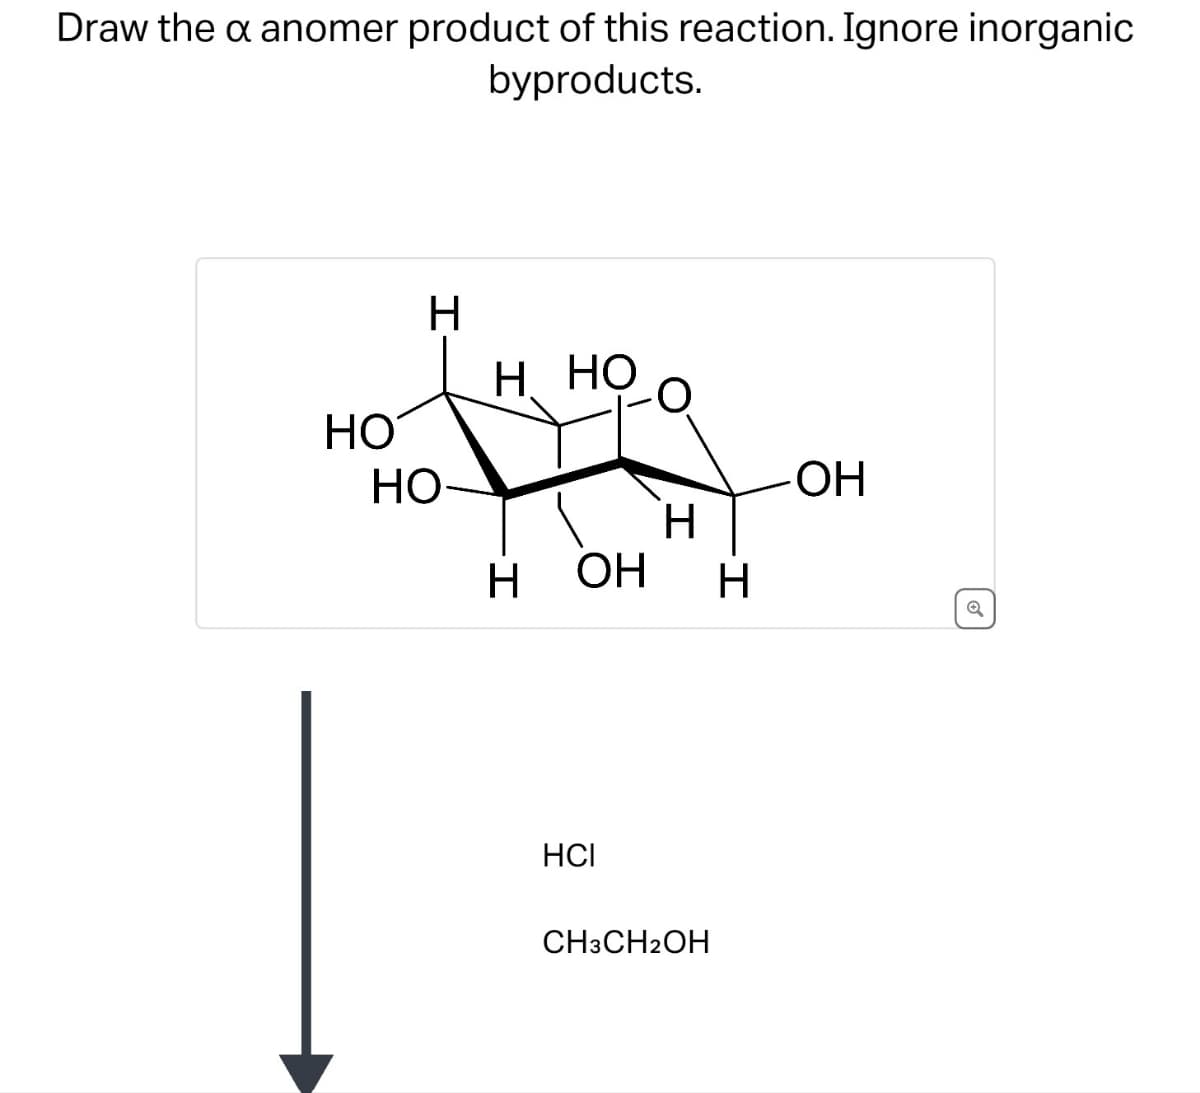 Draw the x anomer product of this reaction. Ignore inorganic
byproducts.
H
H HO
HO
HO-
.OH
H
H OH
H
HCI
CH3CH2OH